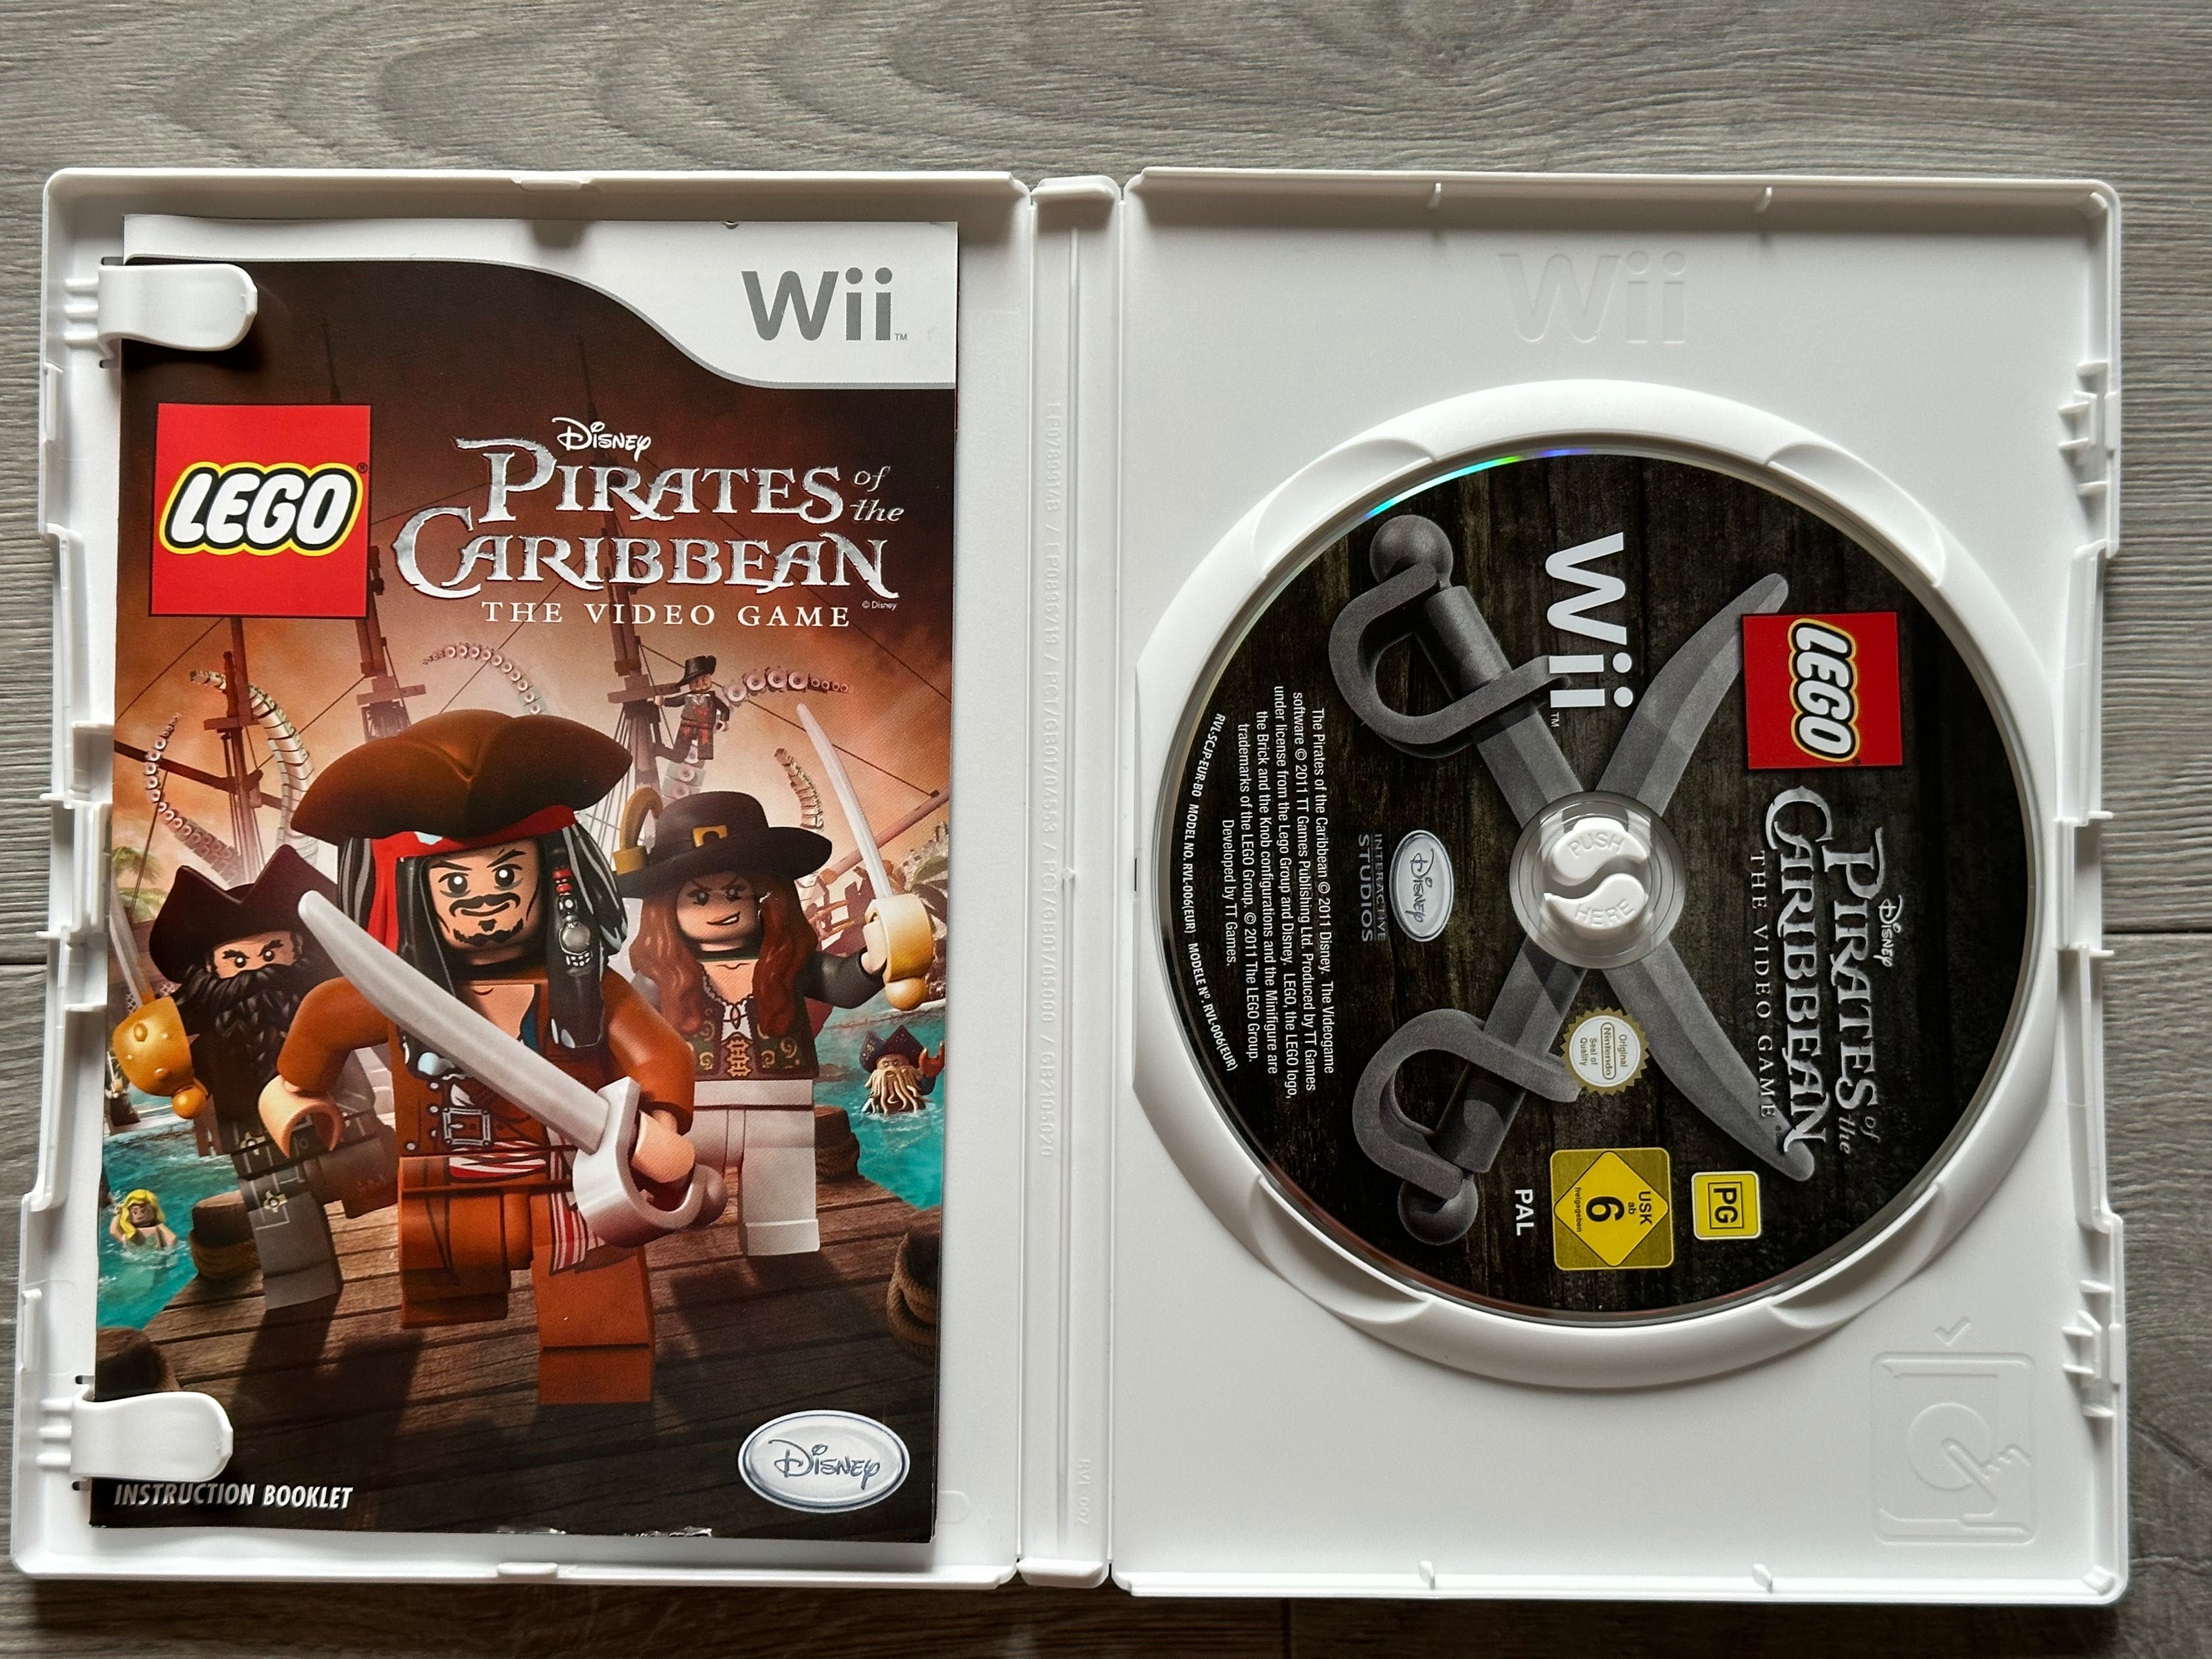 LEGO Pirates of the Caribbean / Wii